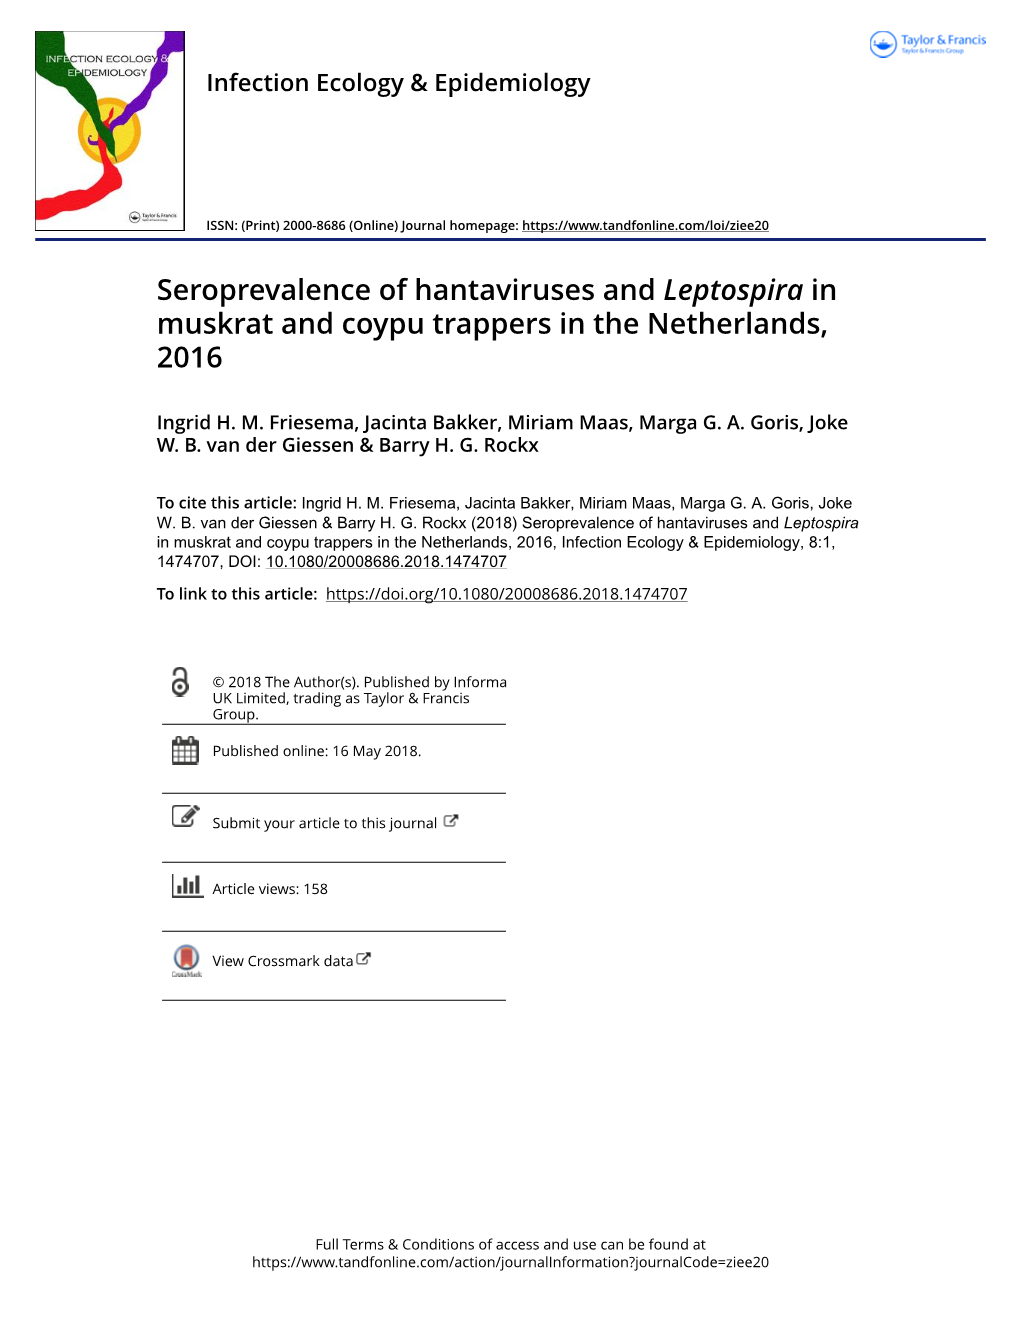 Seroprevalence of Hantaviruses and Leptospira in Muskrat and Coypu Trappers in the Netherlands, 2016